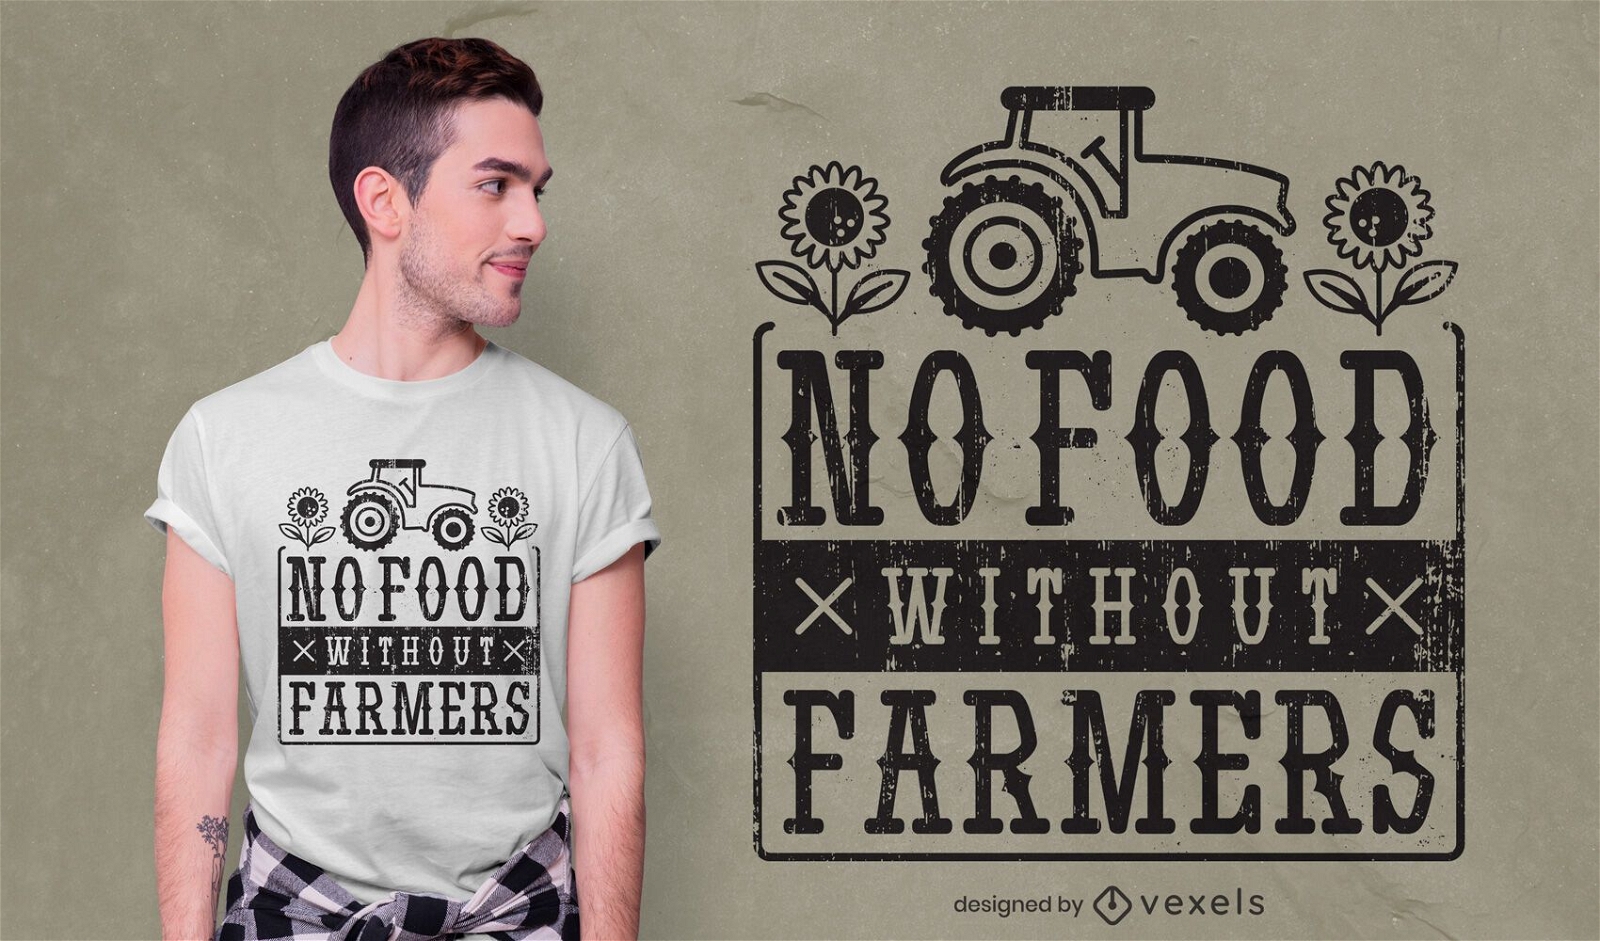 No food without farmers t-shirt design